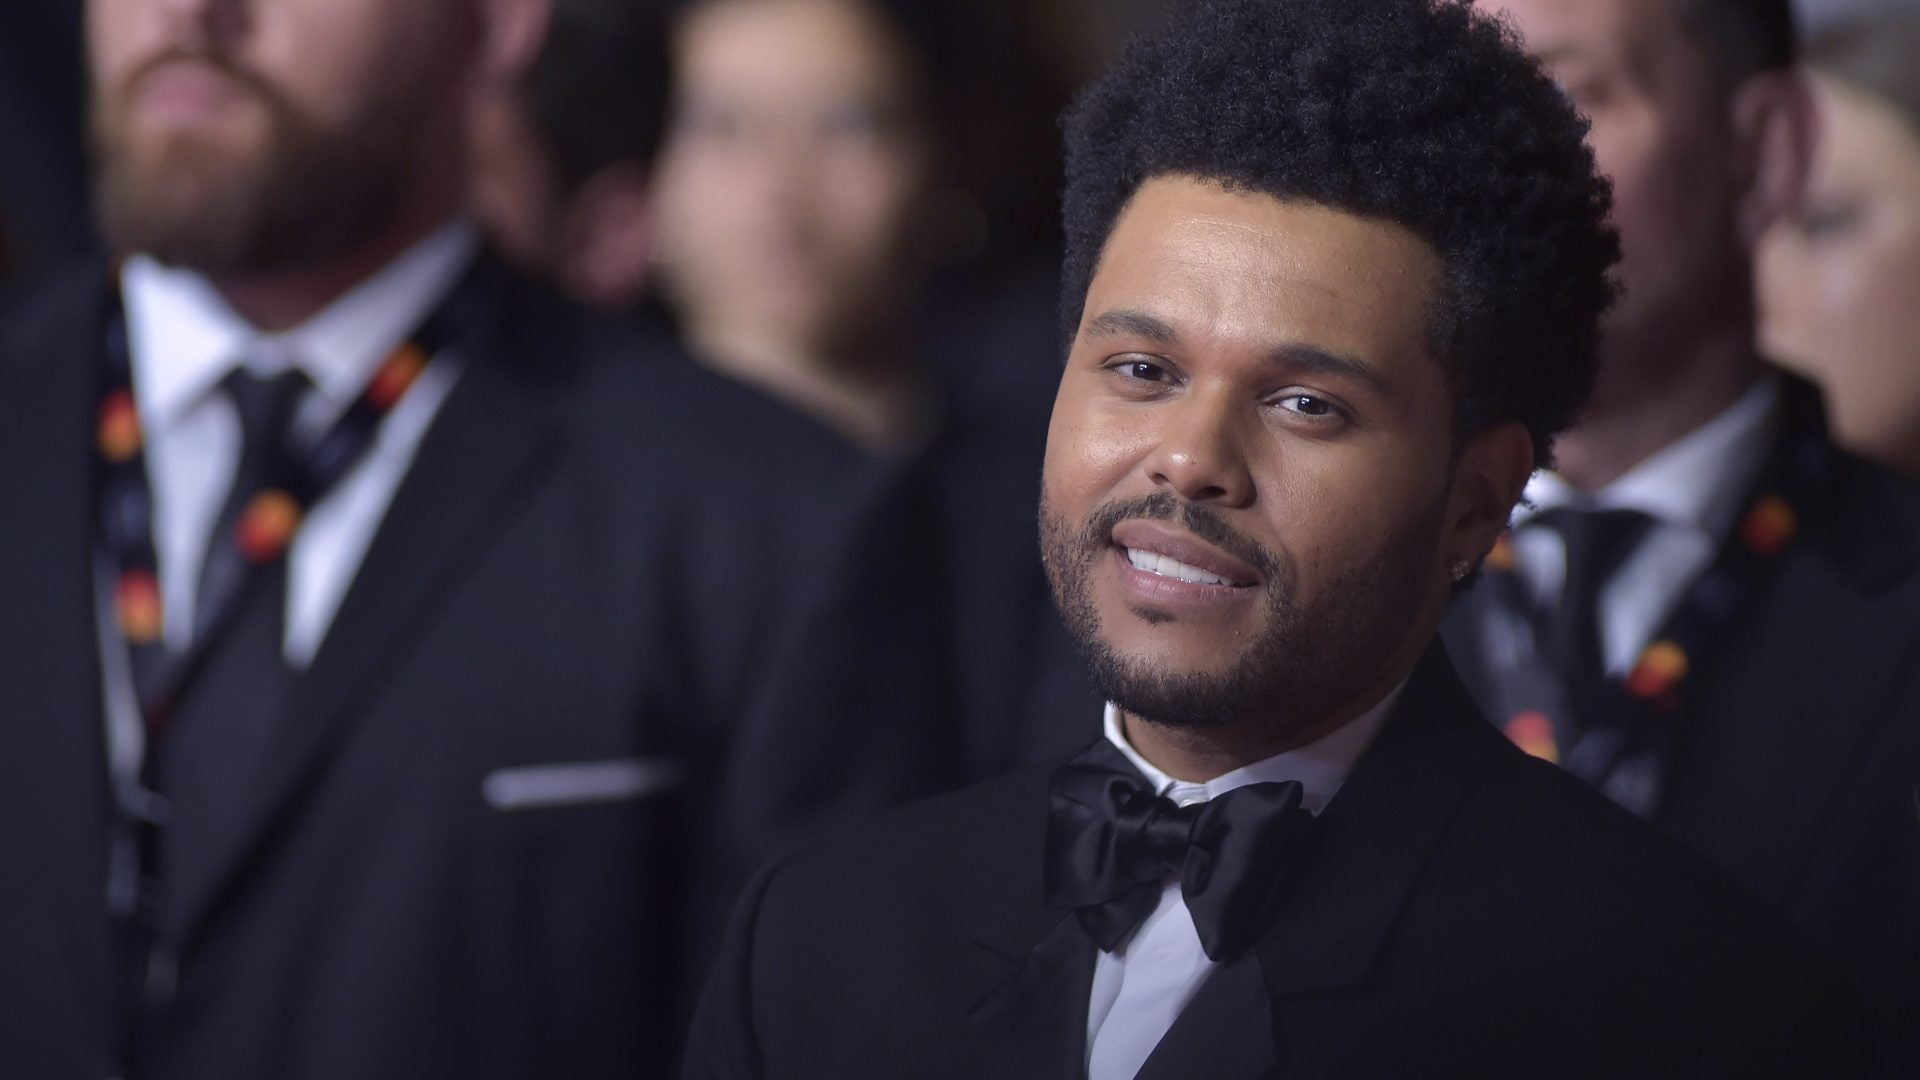 The Weeknd Partnered With This Non-Profit To Give Homeless Children Laptops, Internet And More